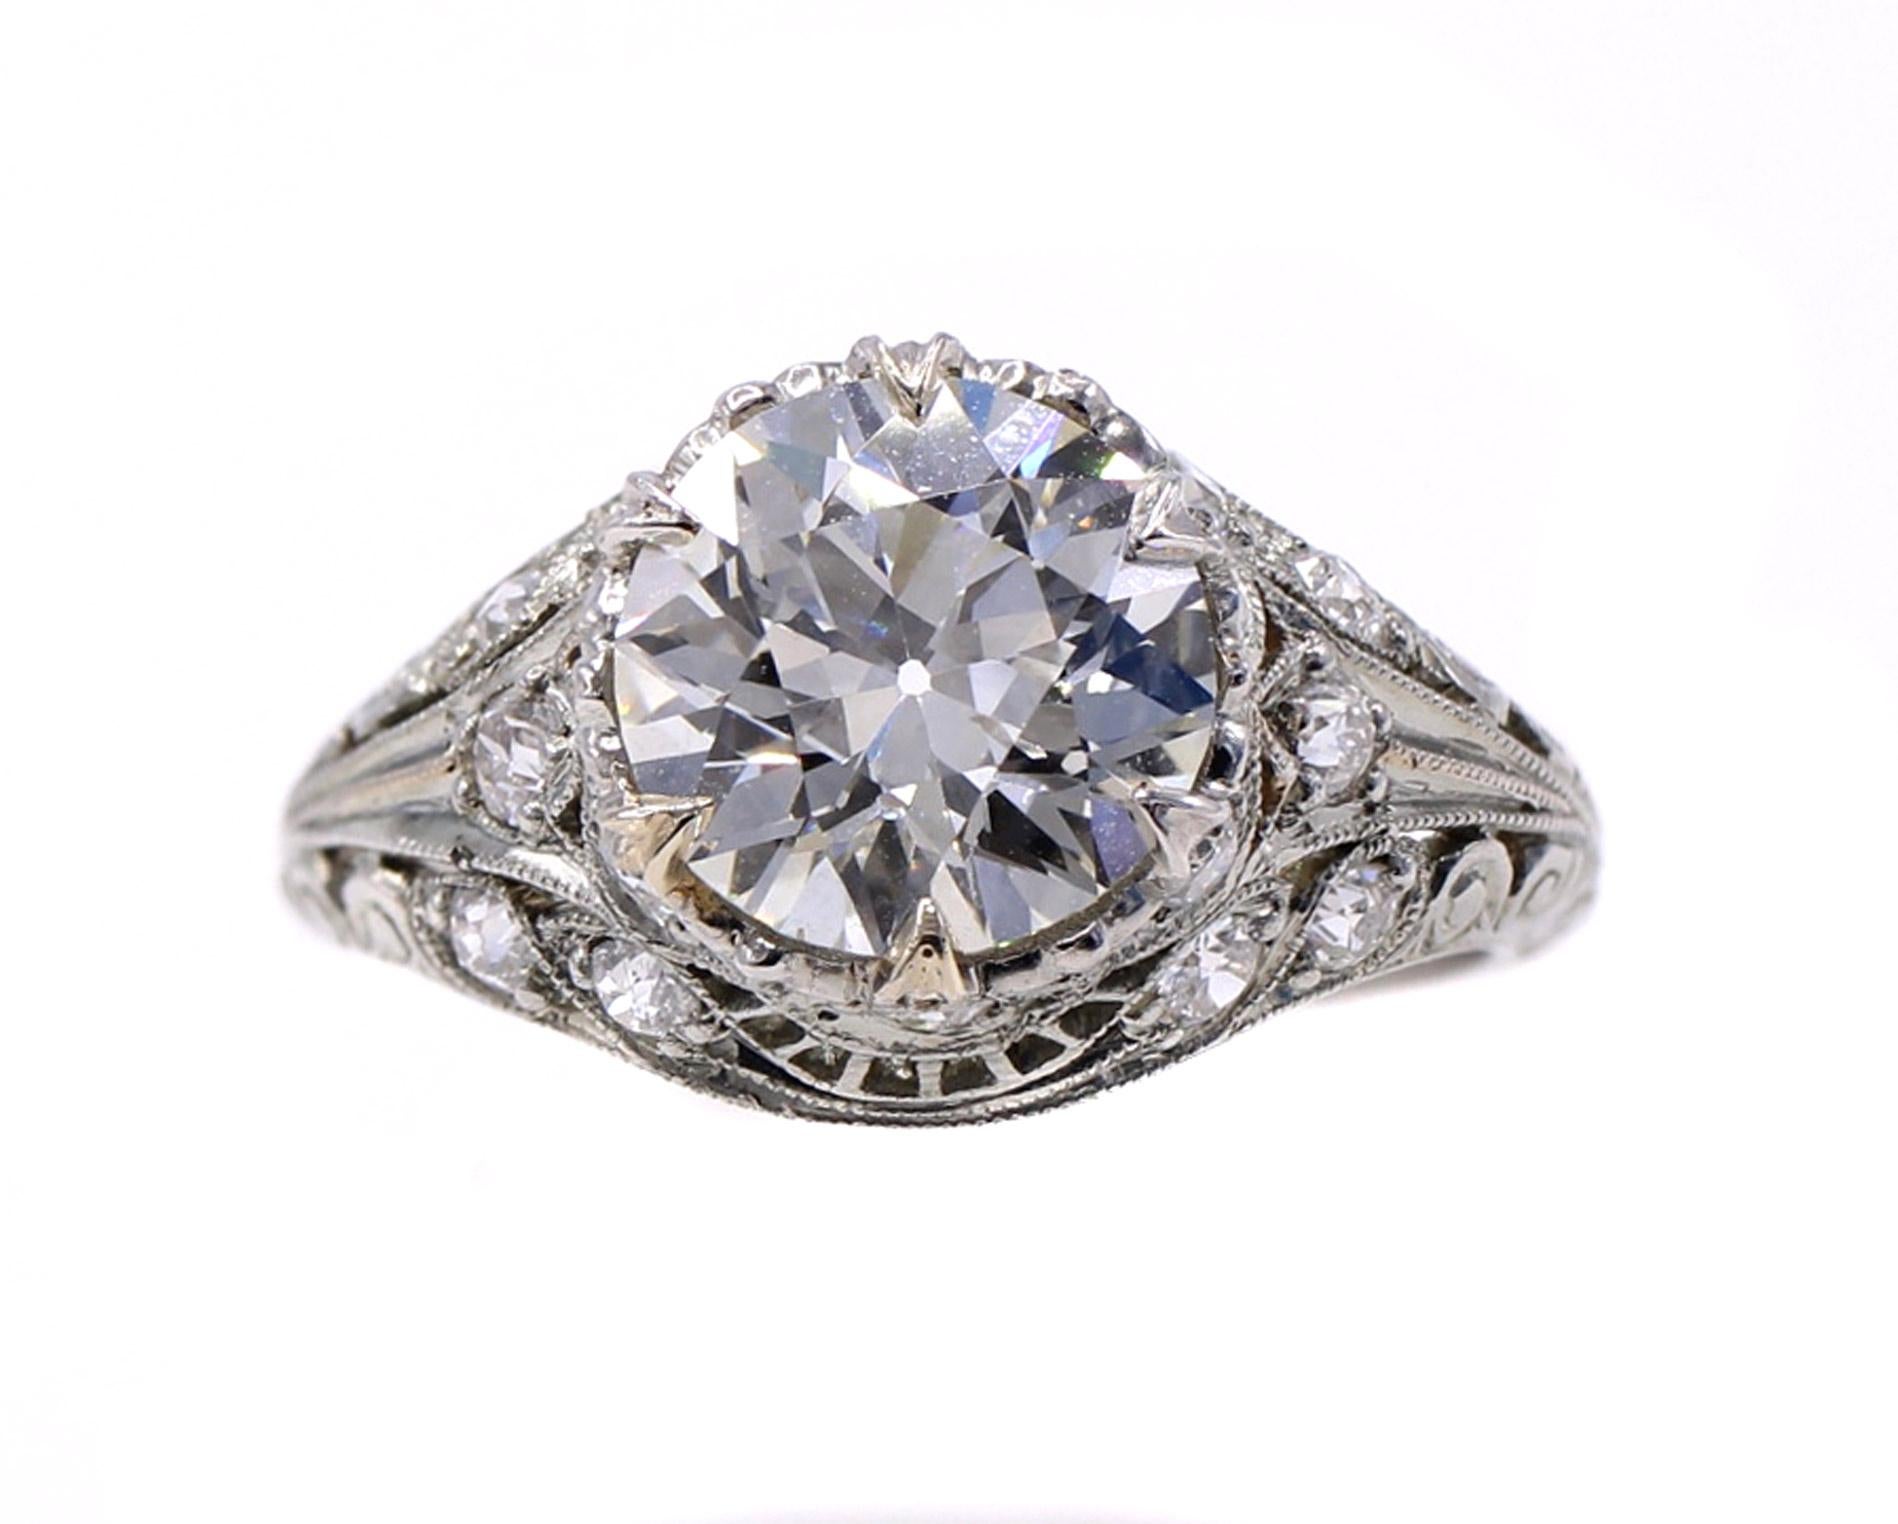 A beautifully cut lively and sparkly Old European Cut diamond is the center piece of this charming well handcrafted Art Deco engagement ring from ca 1925. The center diamond is accompanied by a report from the GIA giving it a color grade of K and a